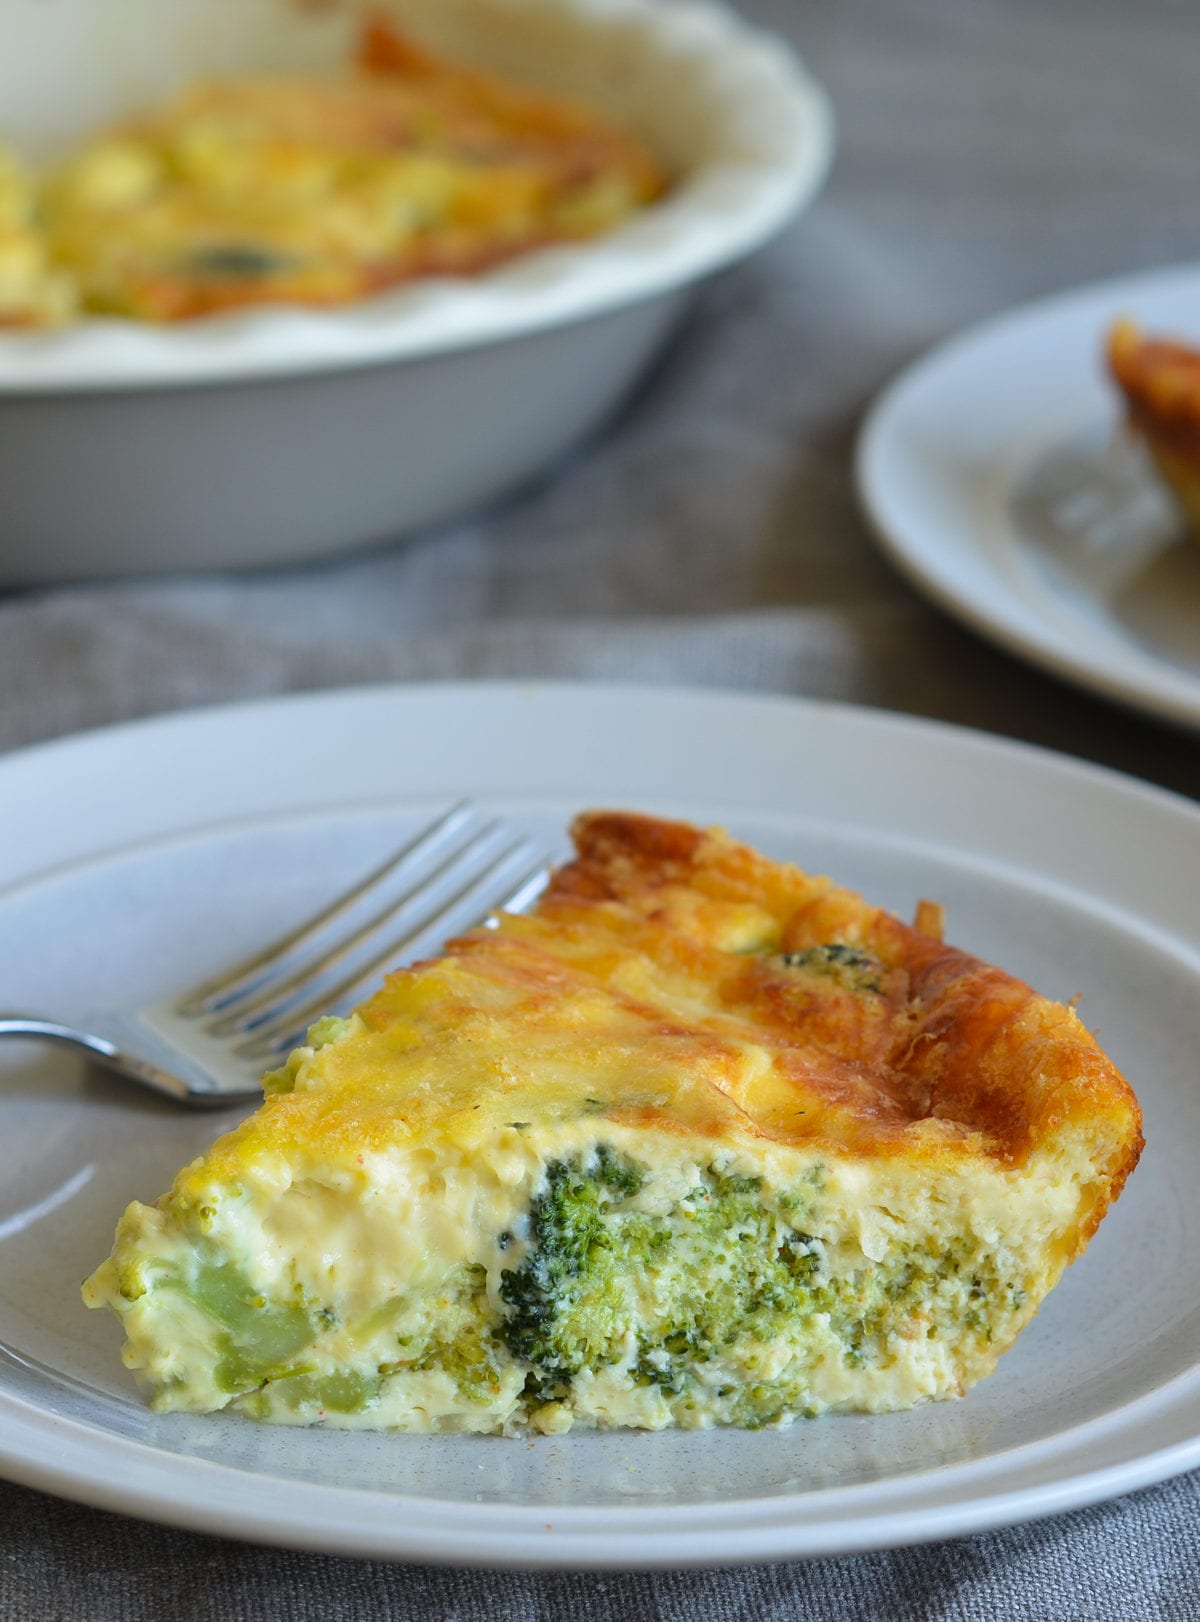 Quiches, Casseroles, Eggs - Once Upon a Chef